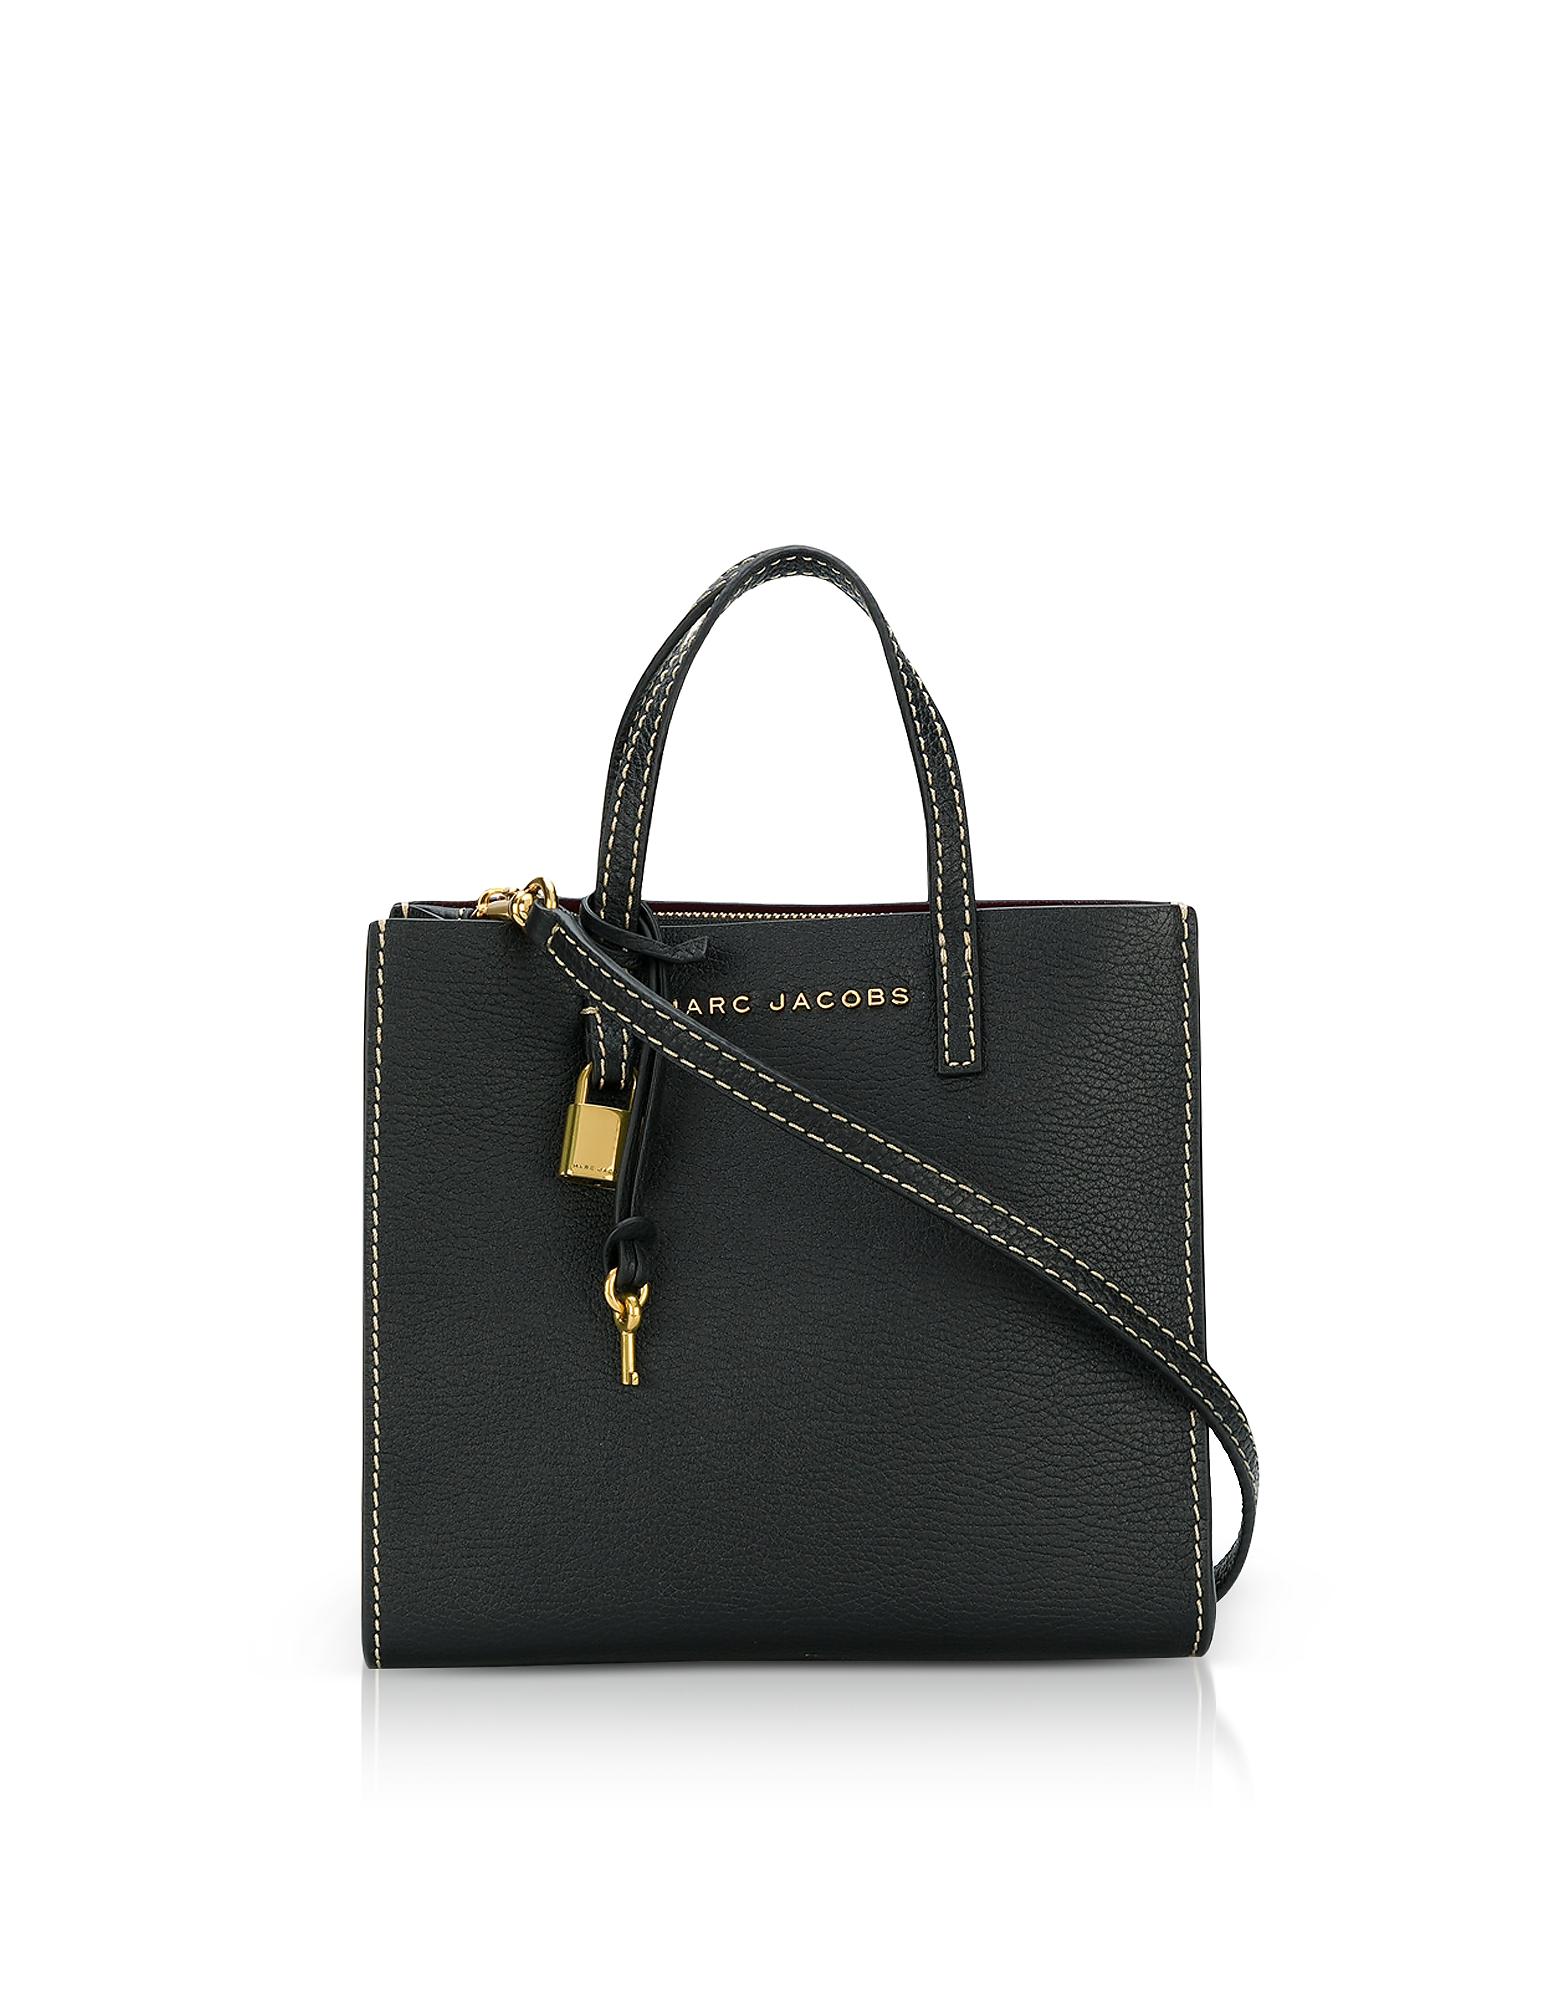 Marc Jacobs Grainy Leather The Mini Grind Tote Bag in Black - Lyst